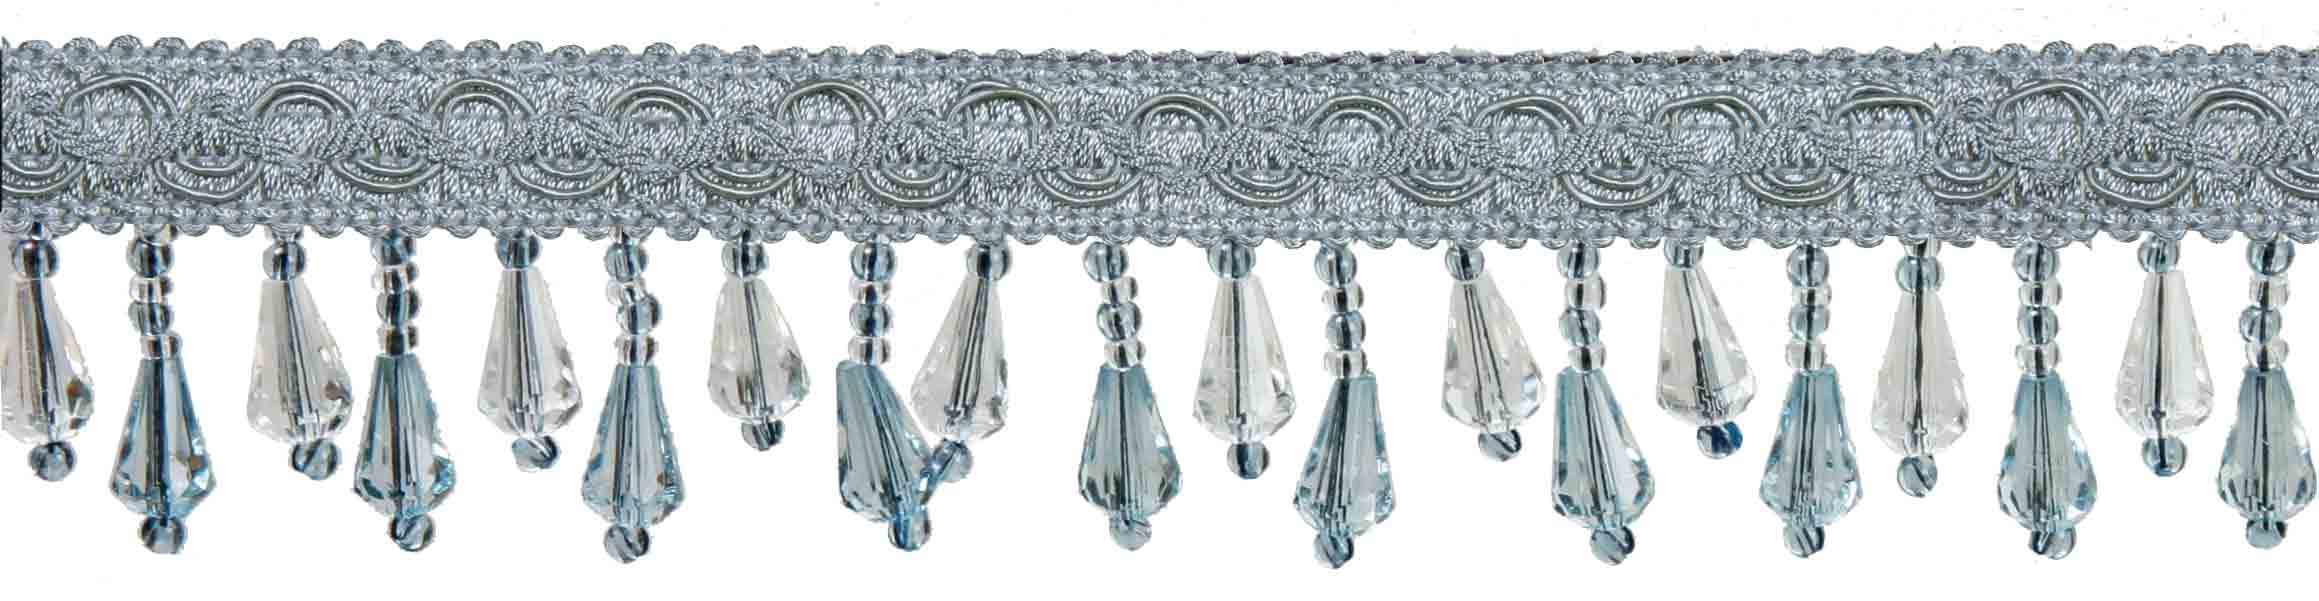 Fringe Beading Silver Braid 40mm Price is for 5 metres